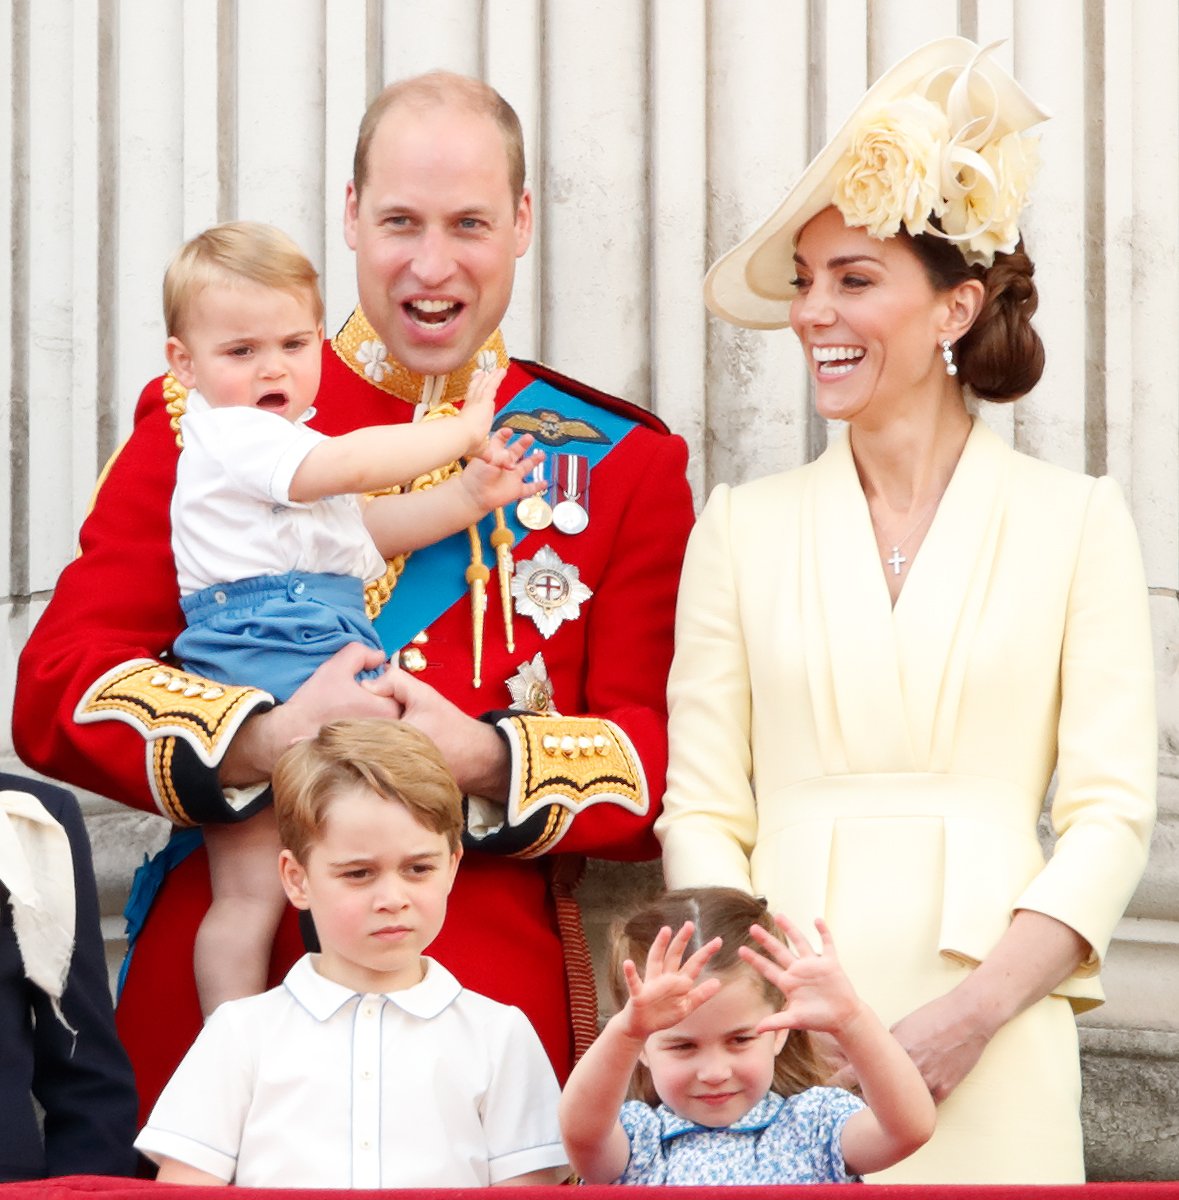 Prince William, Kate Middleton, and their children at the 2019 Trooping the Colour